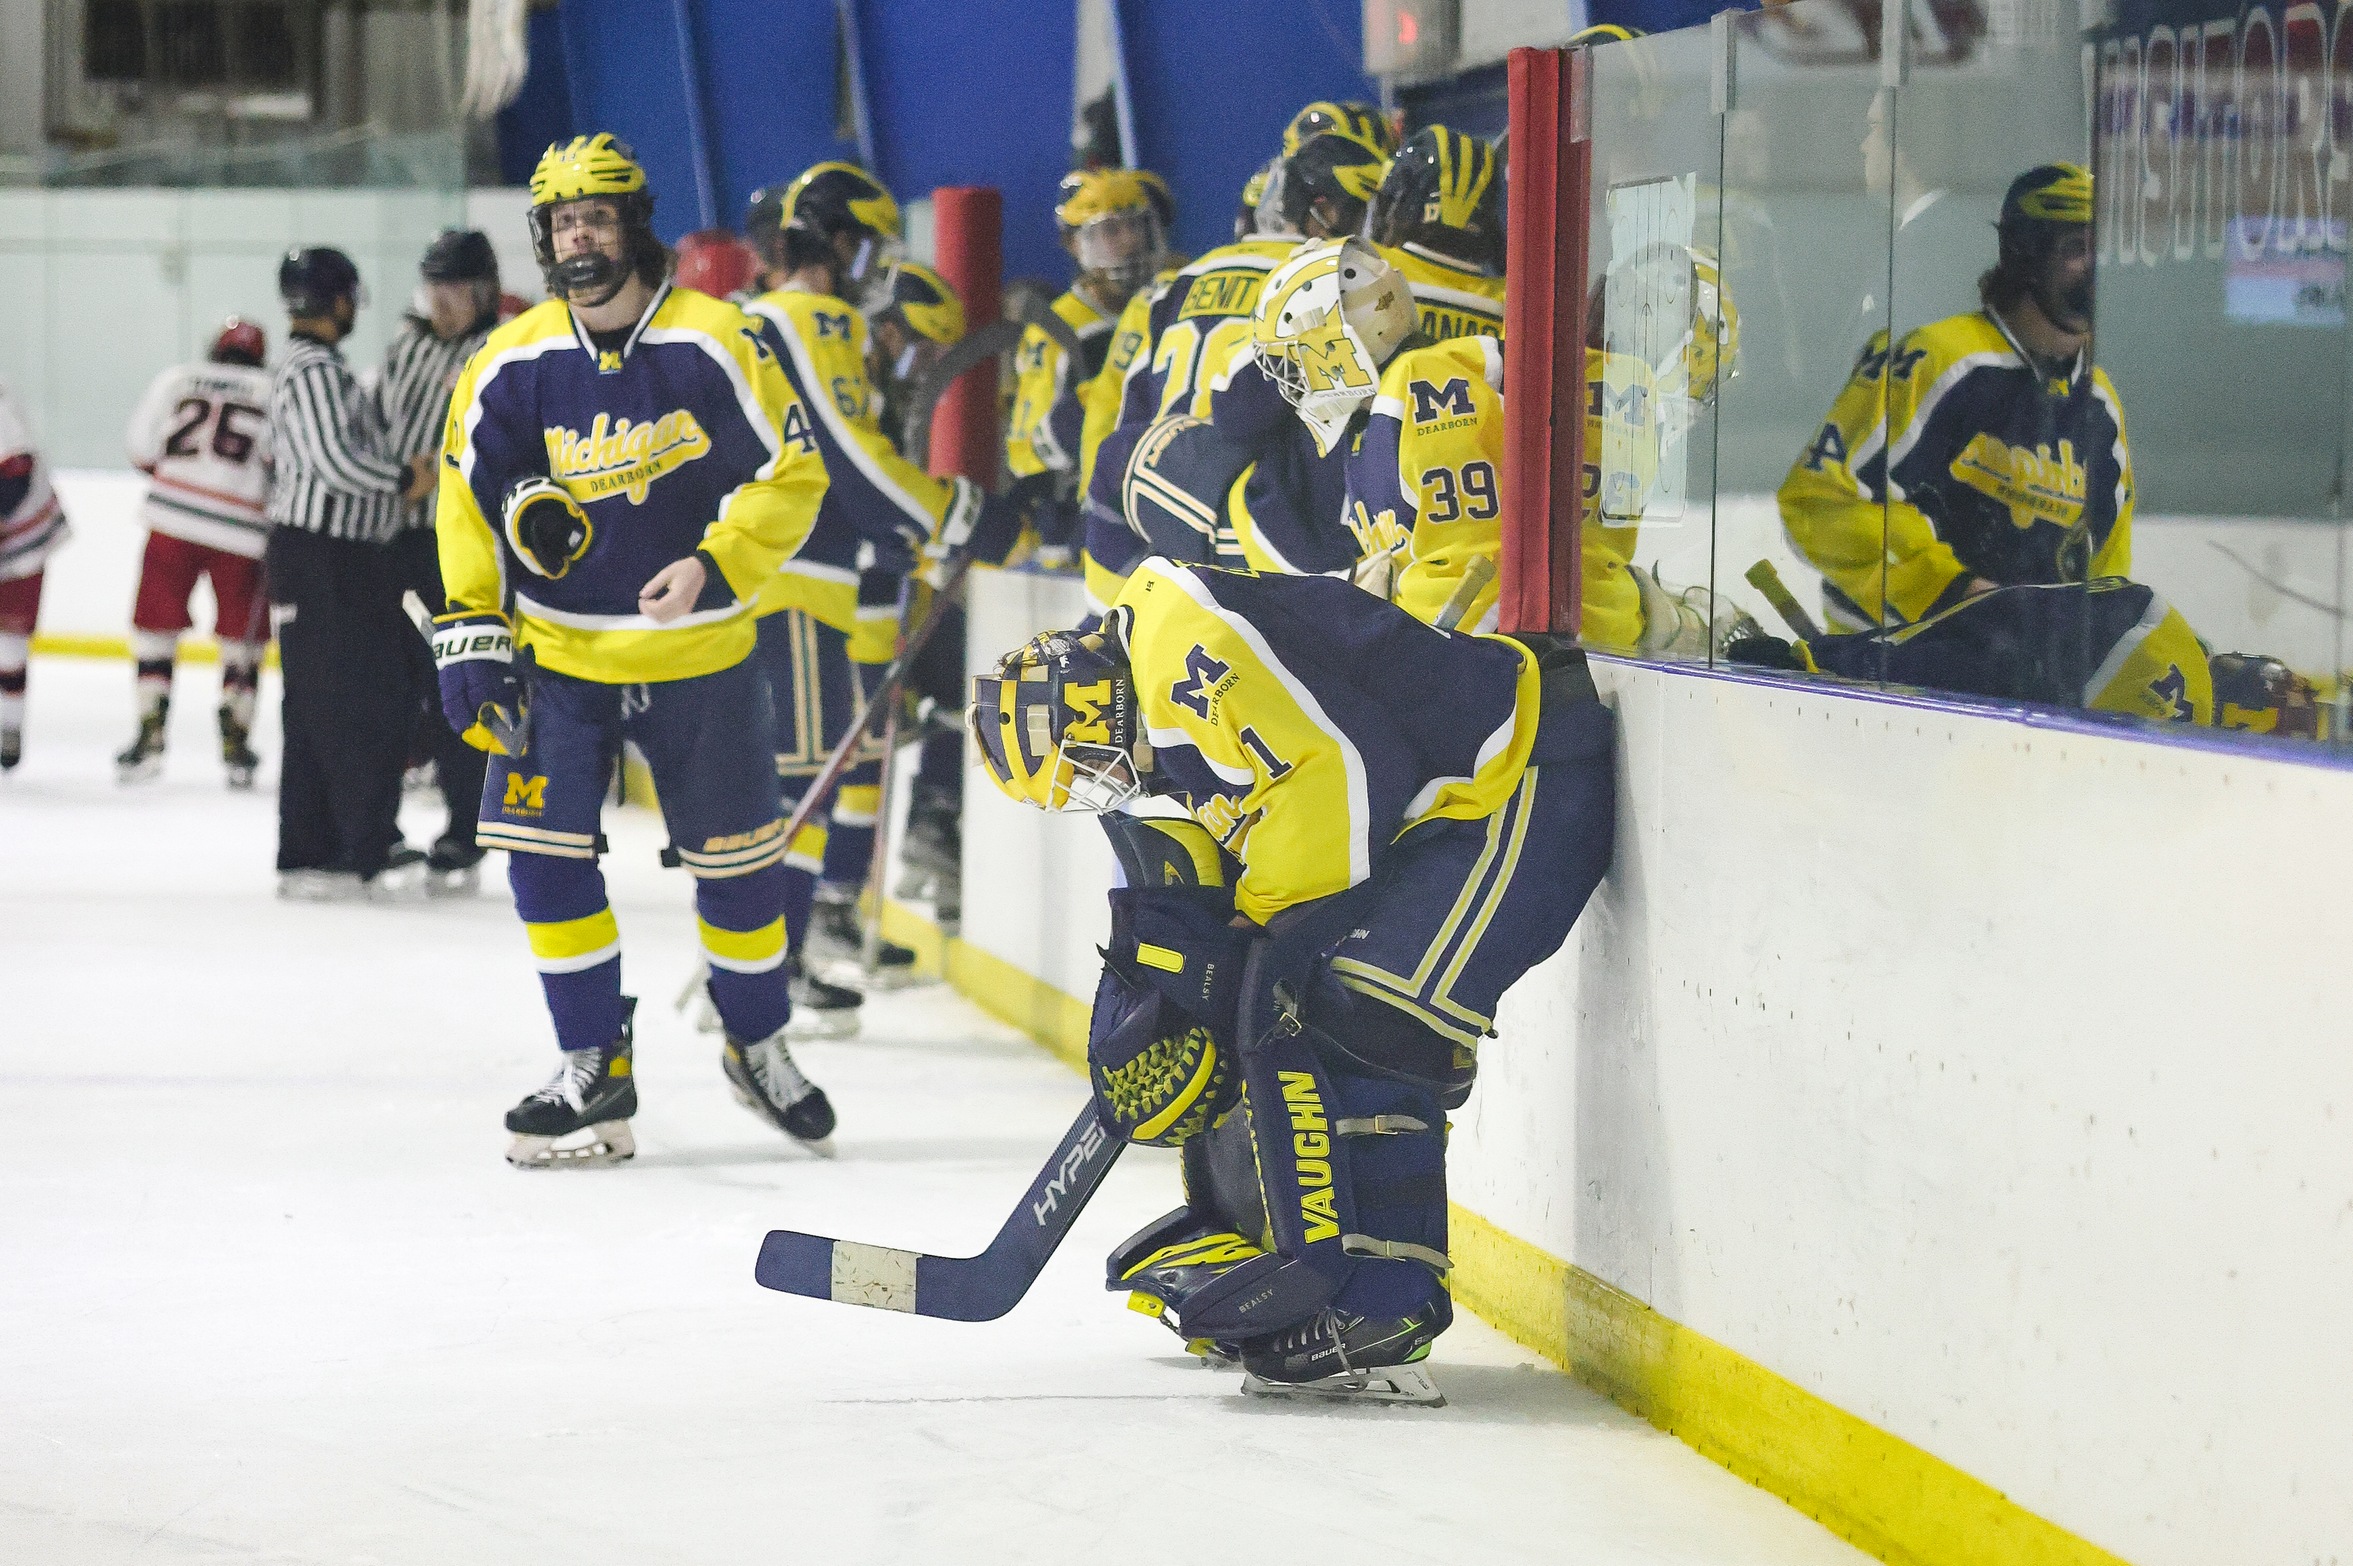 Wolverines Swept By Saints in Shootout Loss